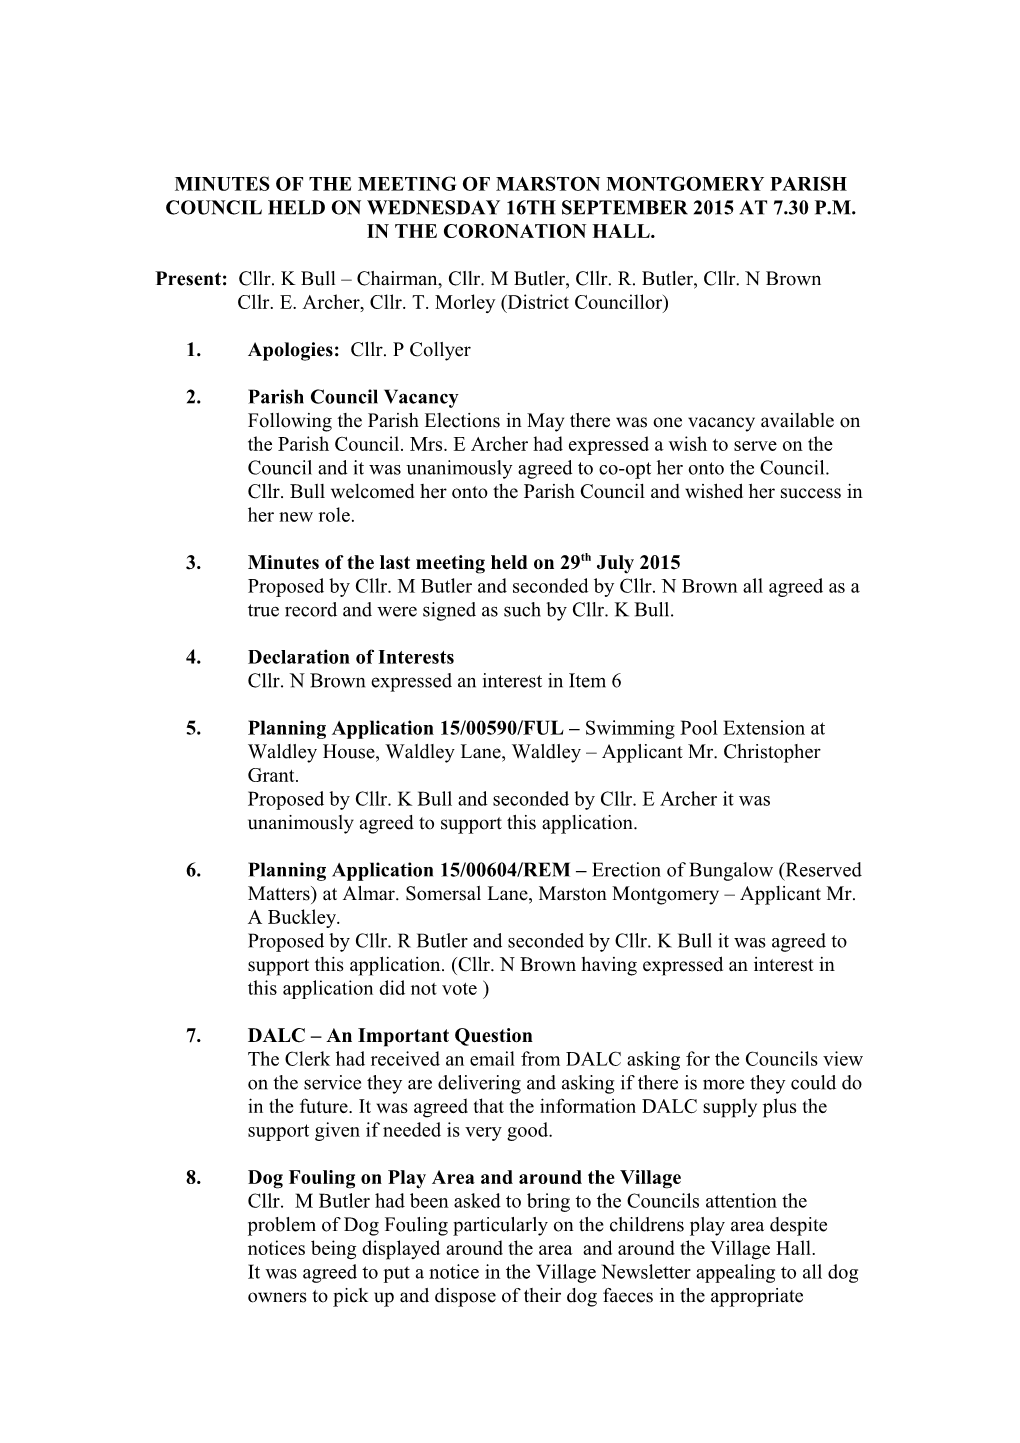 Minutes of the Meeting of Marston Montgomery Parish Council Held on Wednesday 16Th September